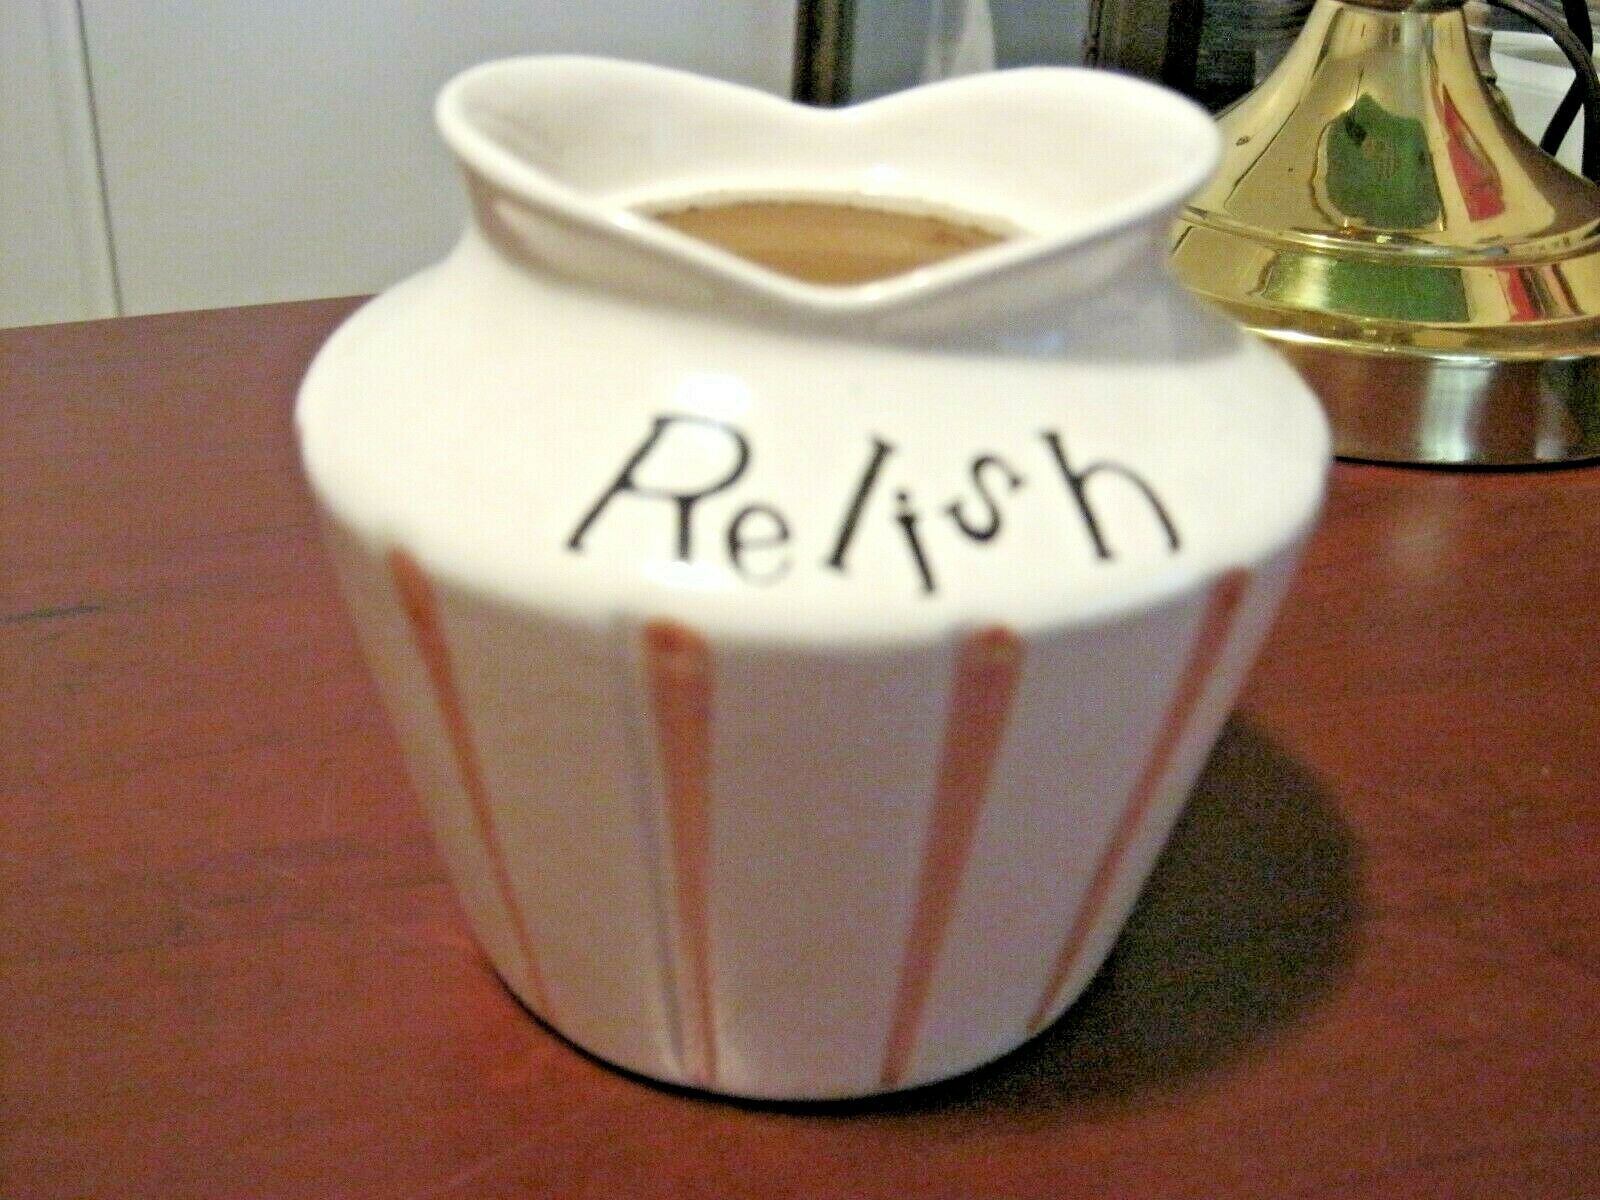 Lefton Pixieware Relish Condiment Jar Only Only Pink Stripes 7599